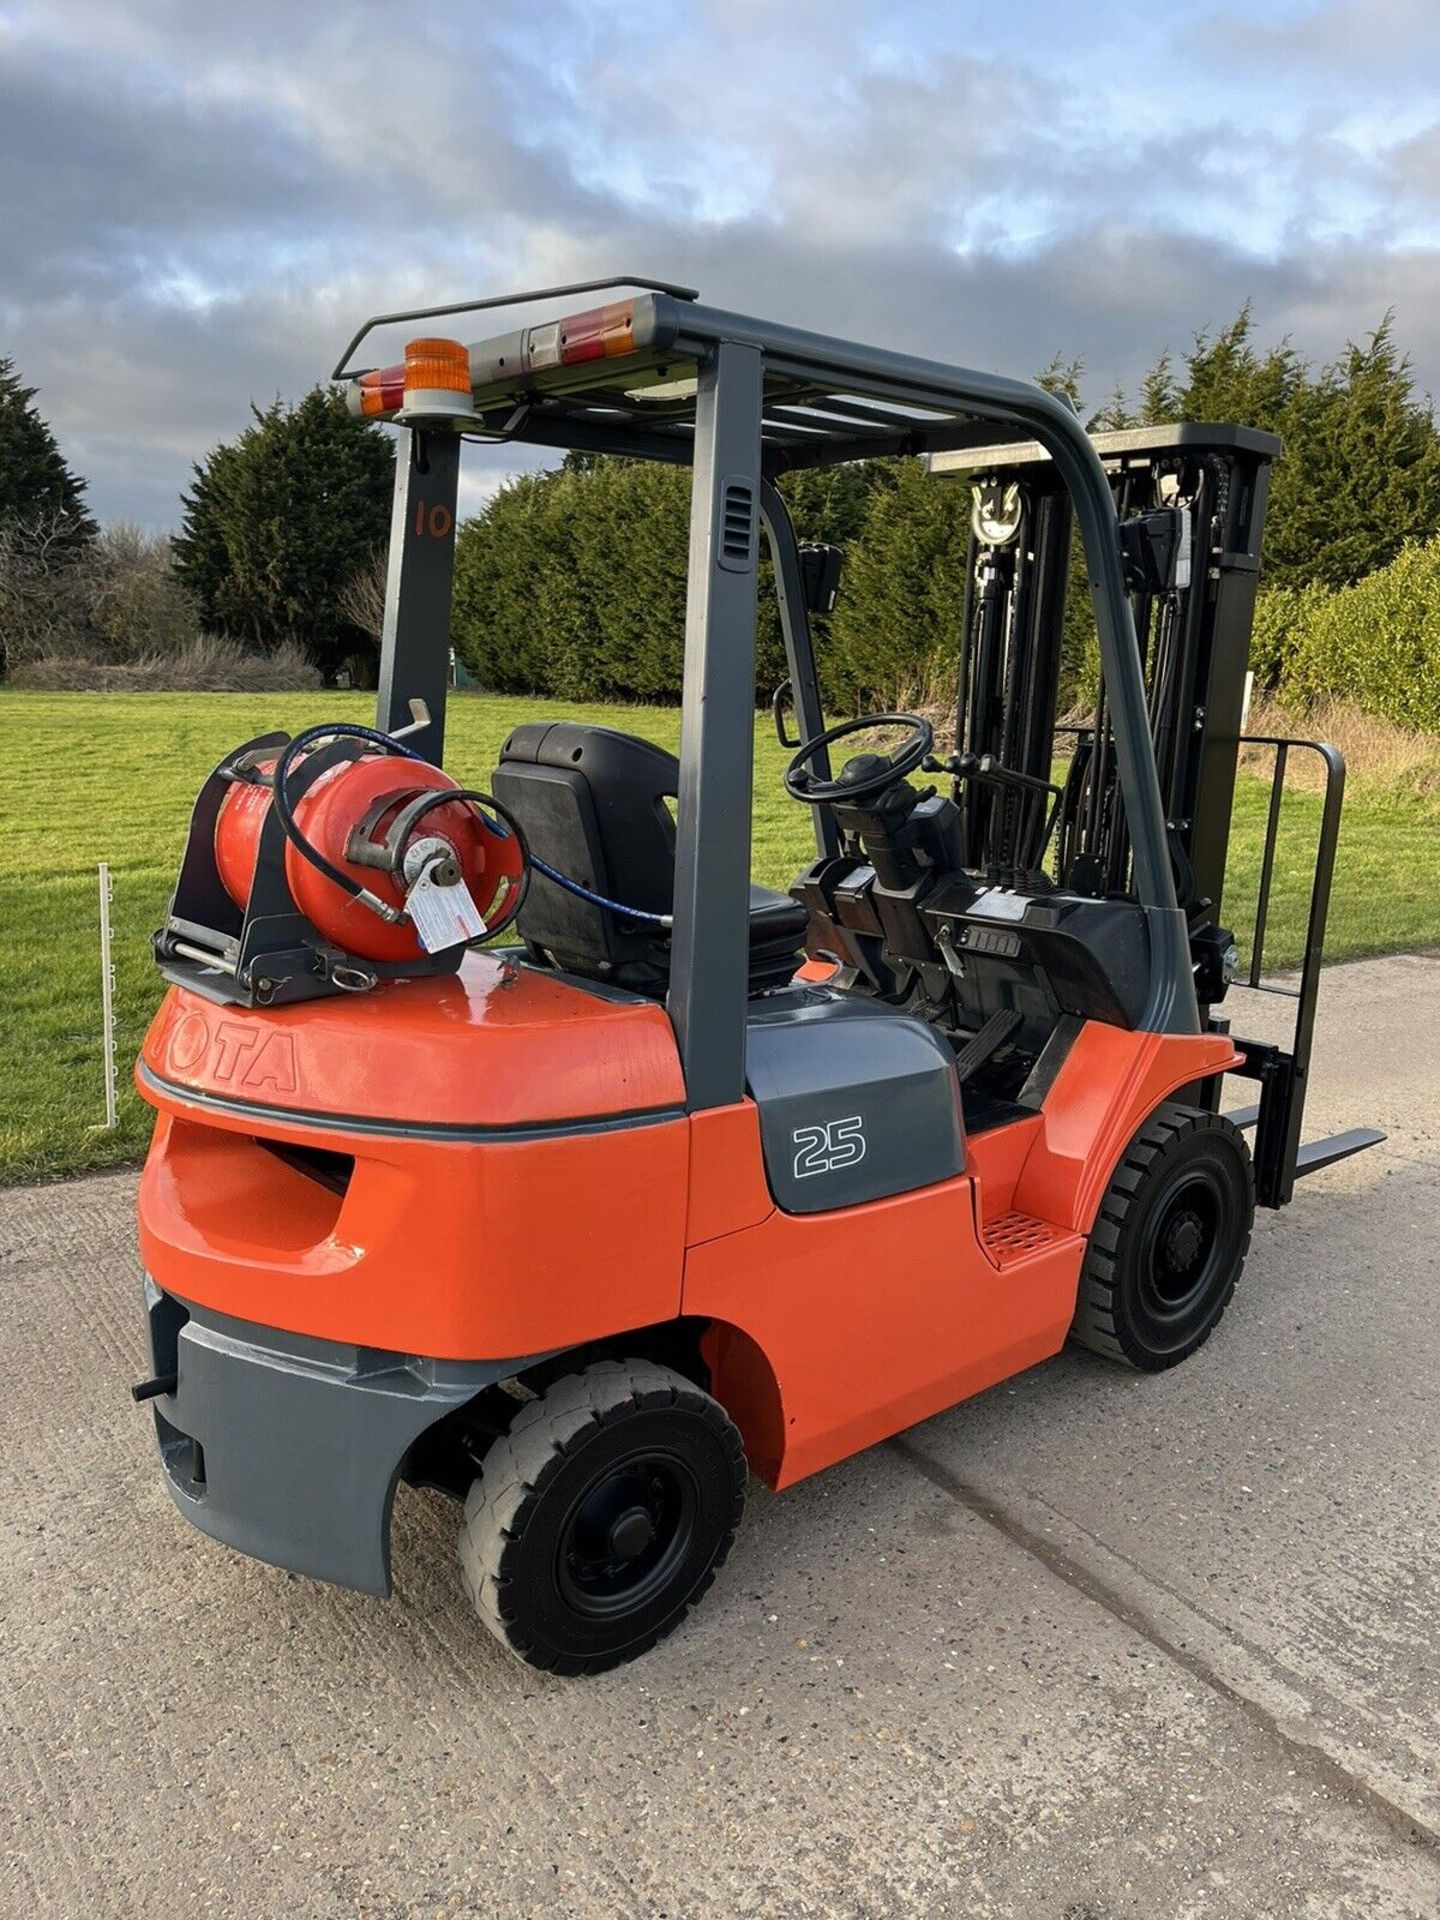 Toyota forklift truck - Image 2 of 5